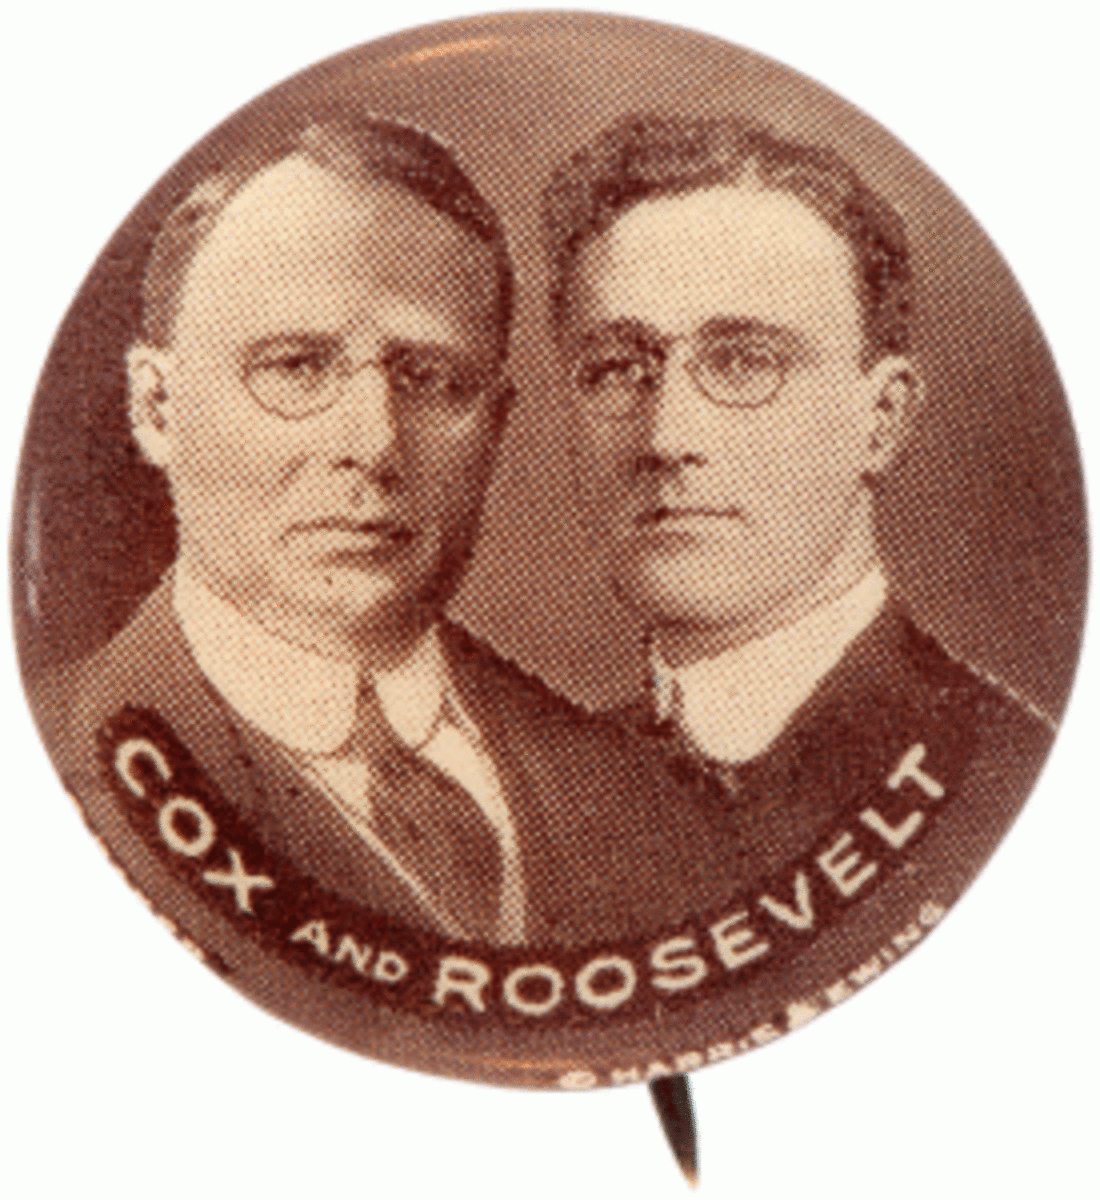 Cox and Roosevelt jugate button